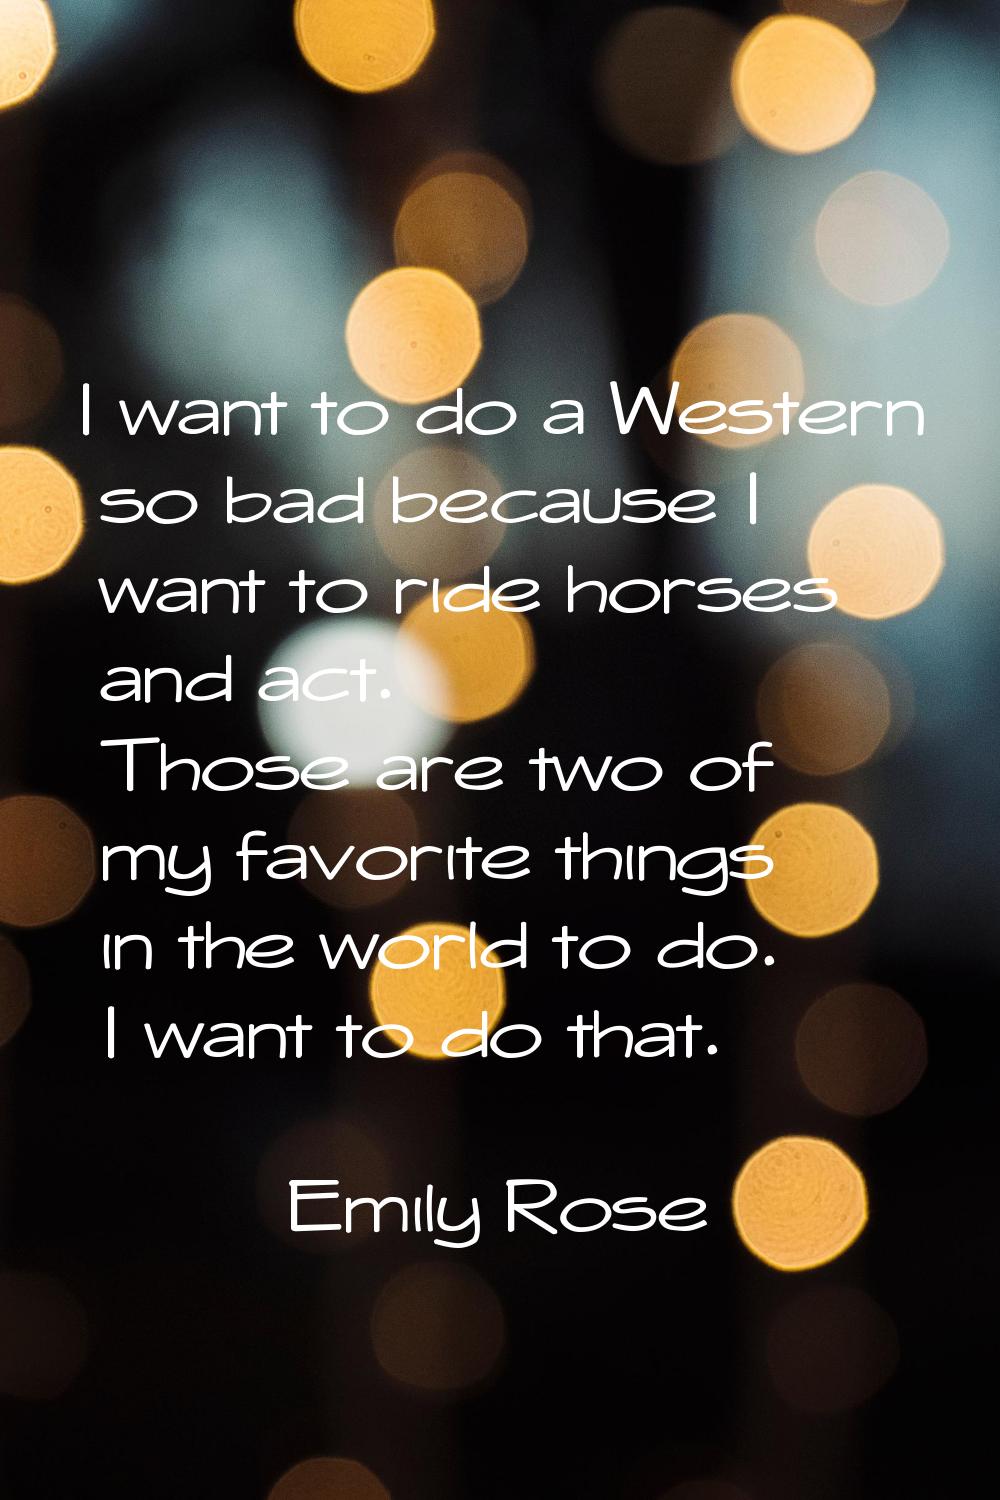 I want to do a Western so bad because I want to ride horses and act. Those are two of my favorite t